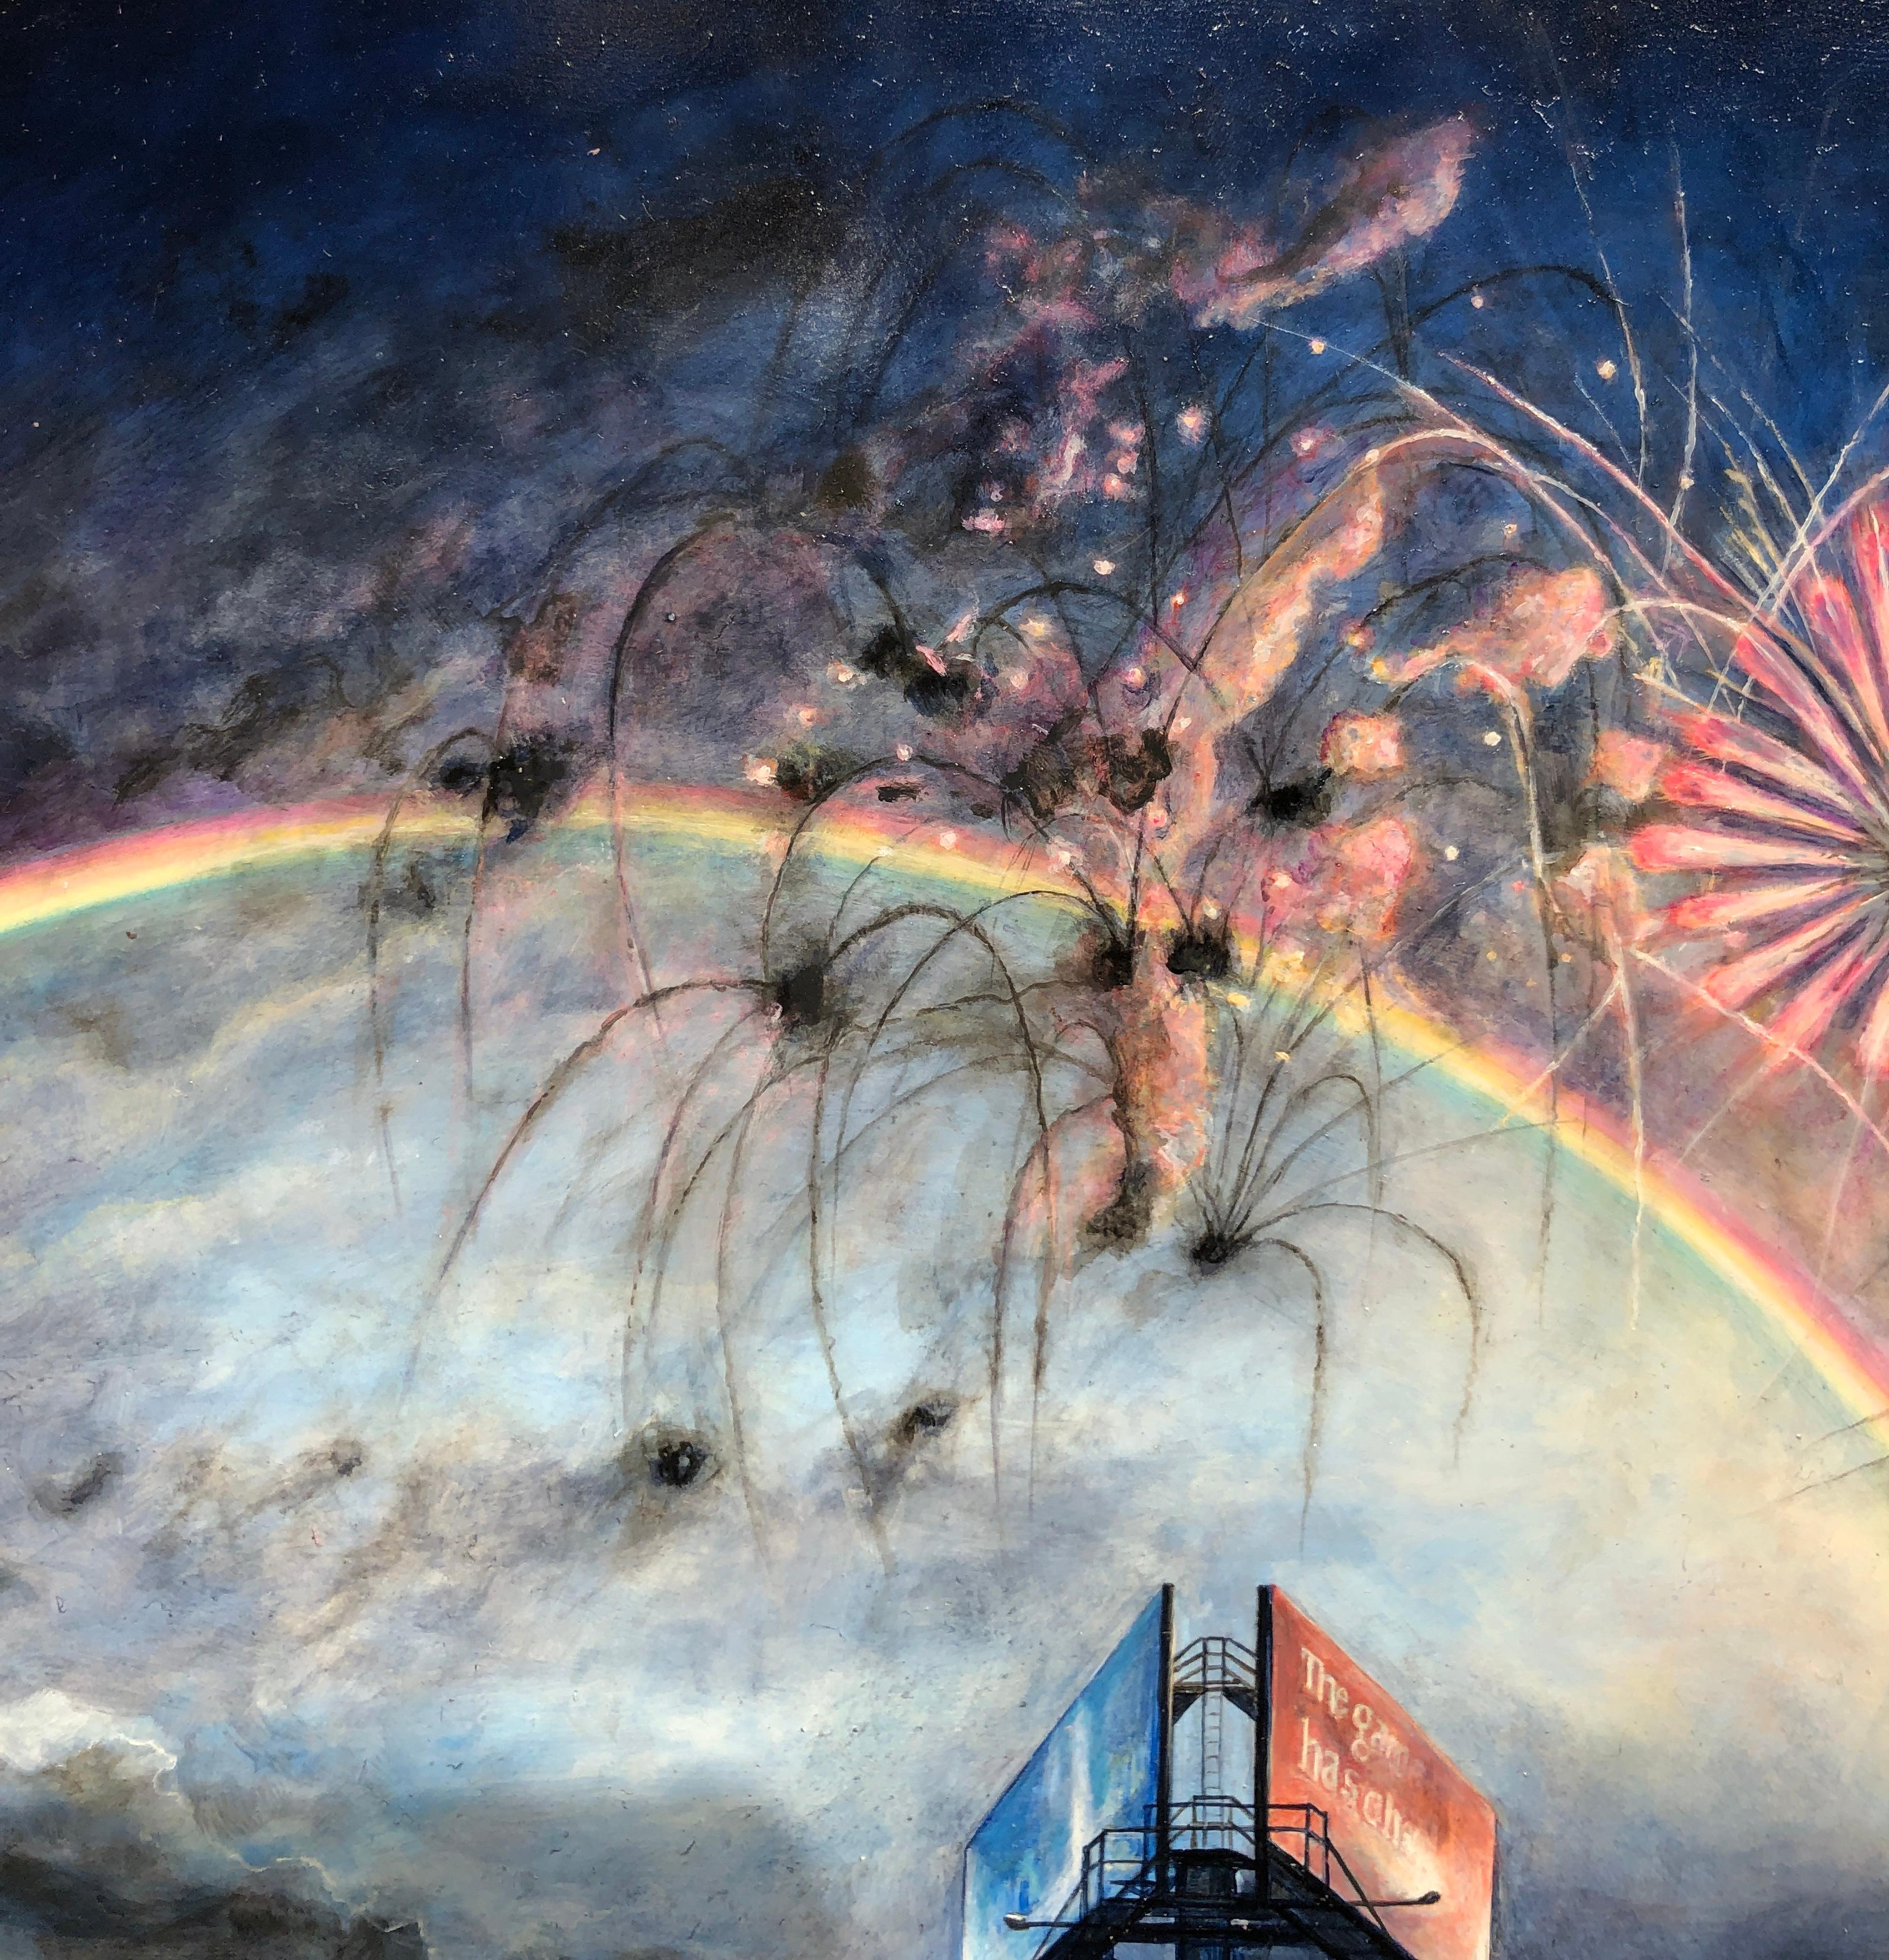 True North - Orientation, Surreal Sky with Billboard, Rainbow and Fireworks - Gray Landscape Painting by Mark Bowers